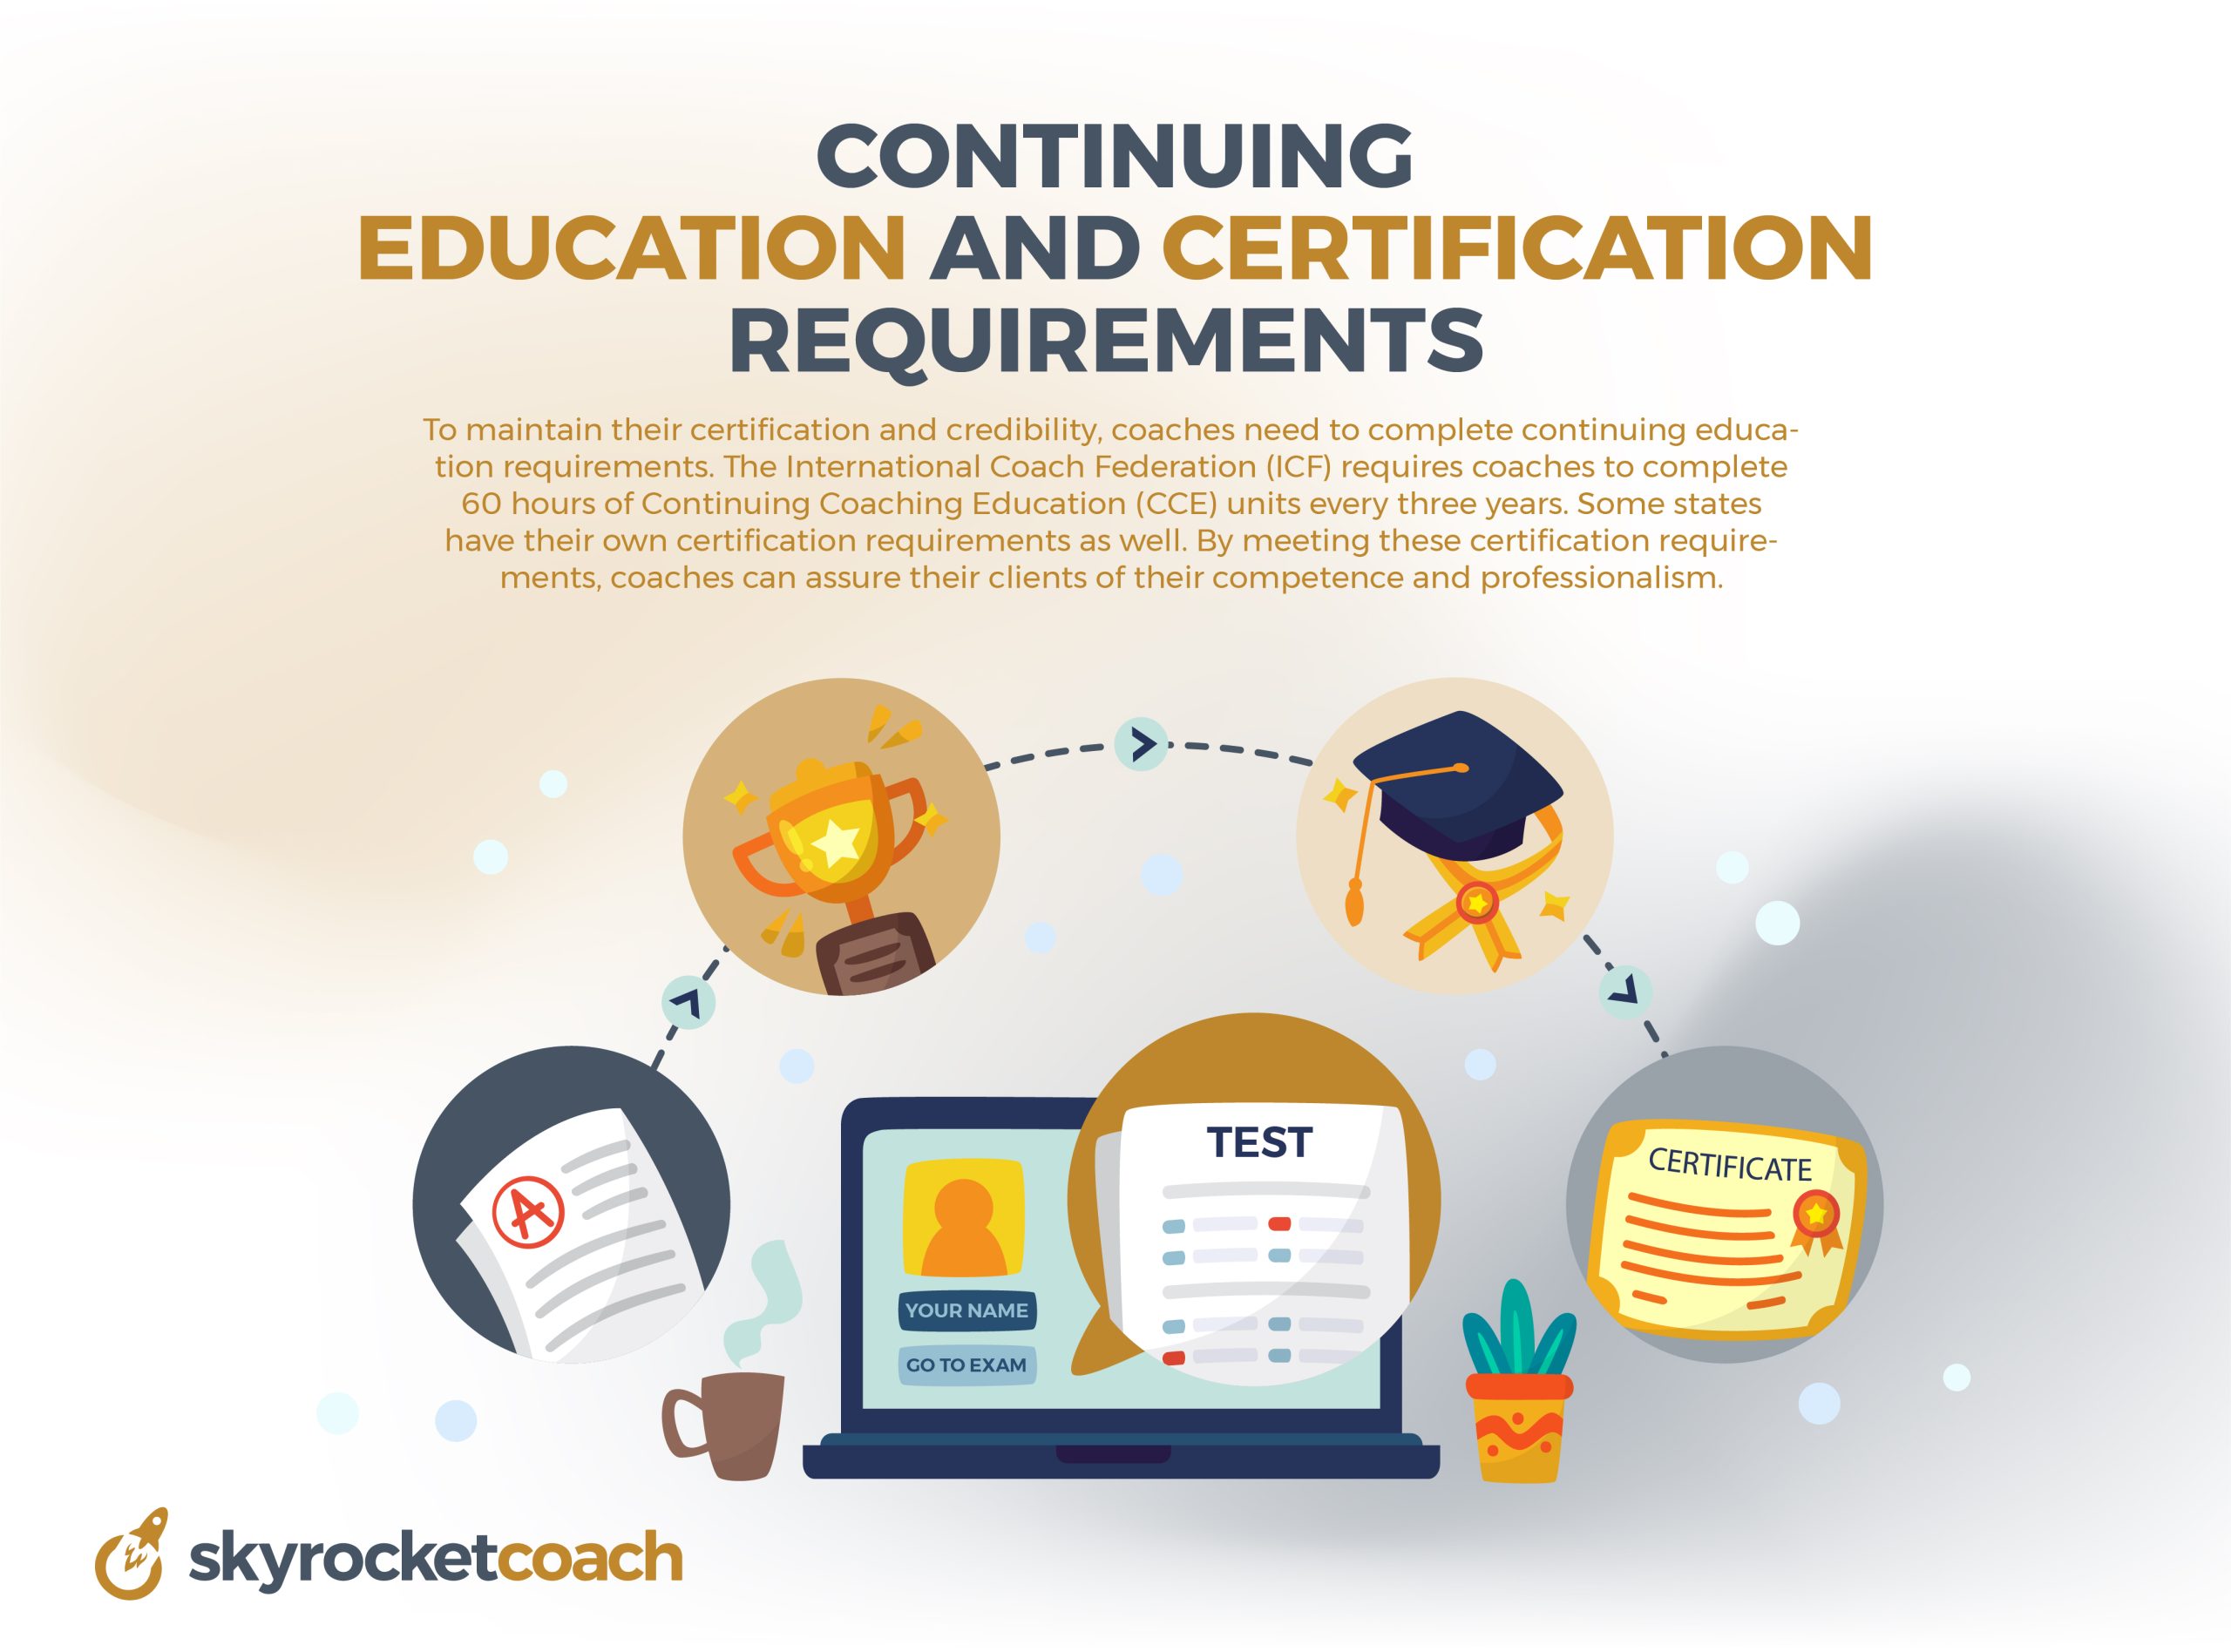 Continuing Education and Certification Requirements